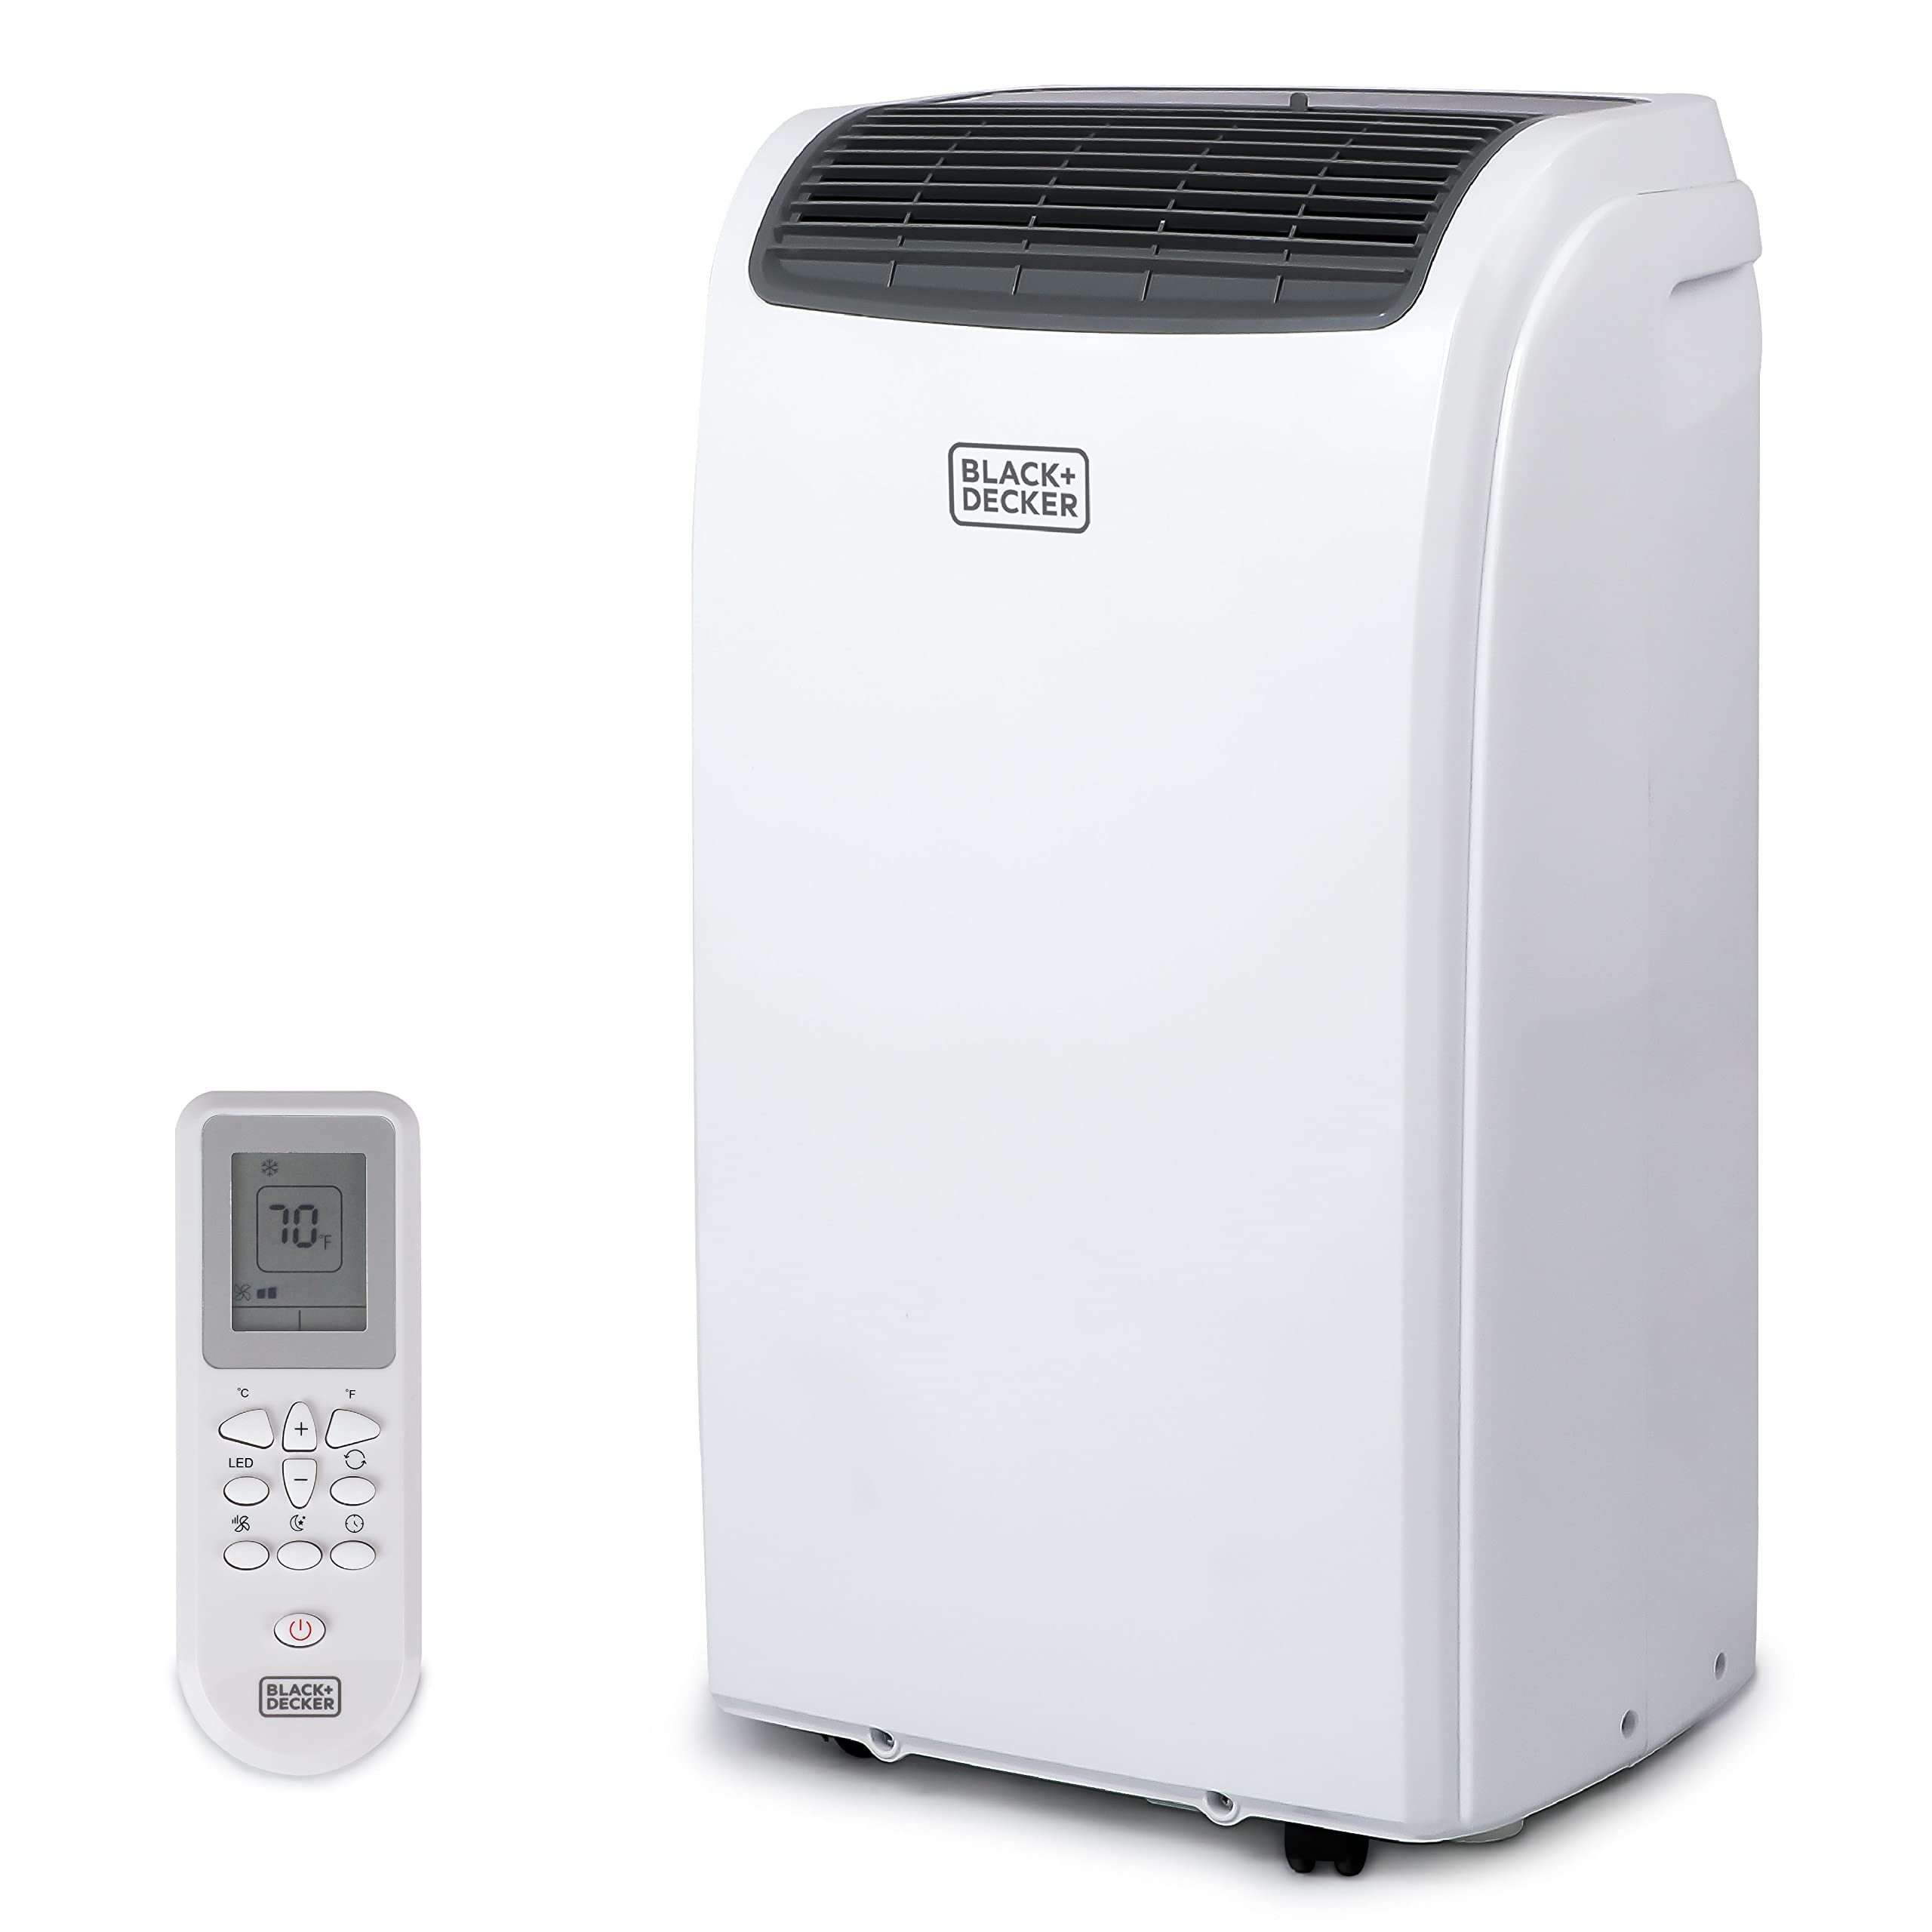 BLACK+DECKER 14,000 BTU Air Conditioner Portable for Room and Heater up to 700 Sq. Ft, 4-in-1 AC Unit, Dehumidifier, & Fan, Portable AC with Installation Kit & Remote Control @ The following redundant information [heater,2][conditioner,2][air,2] should be